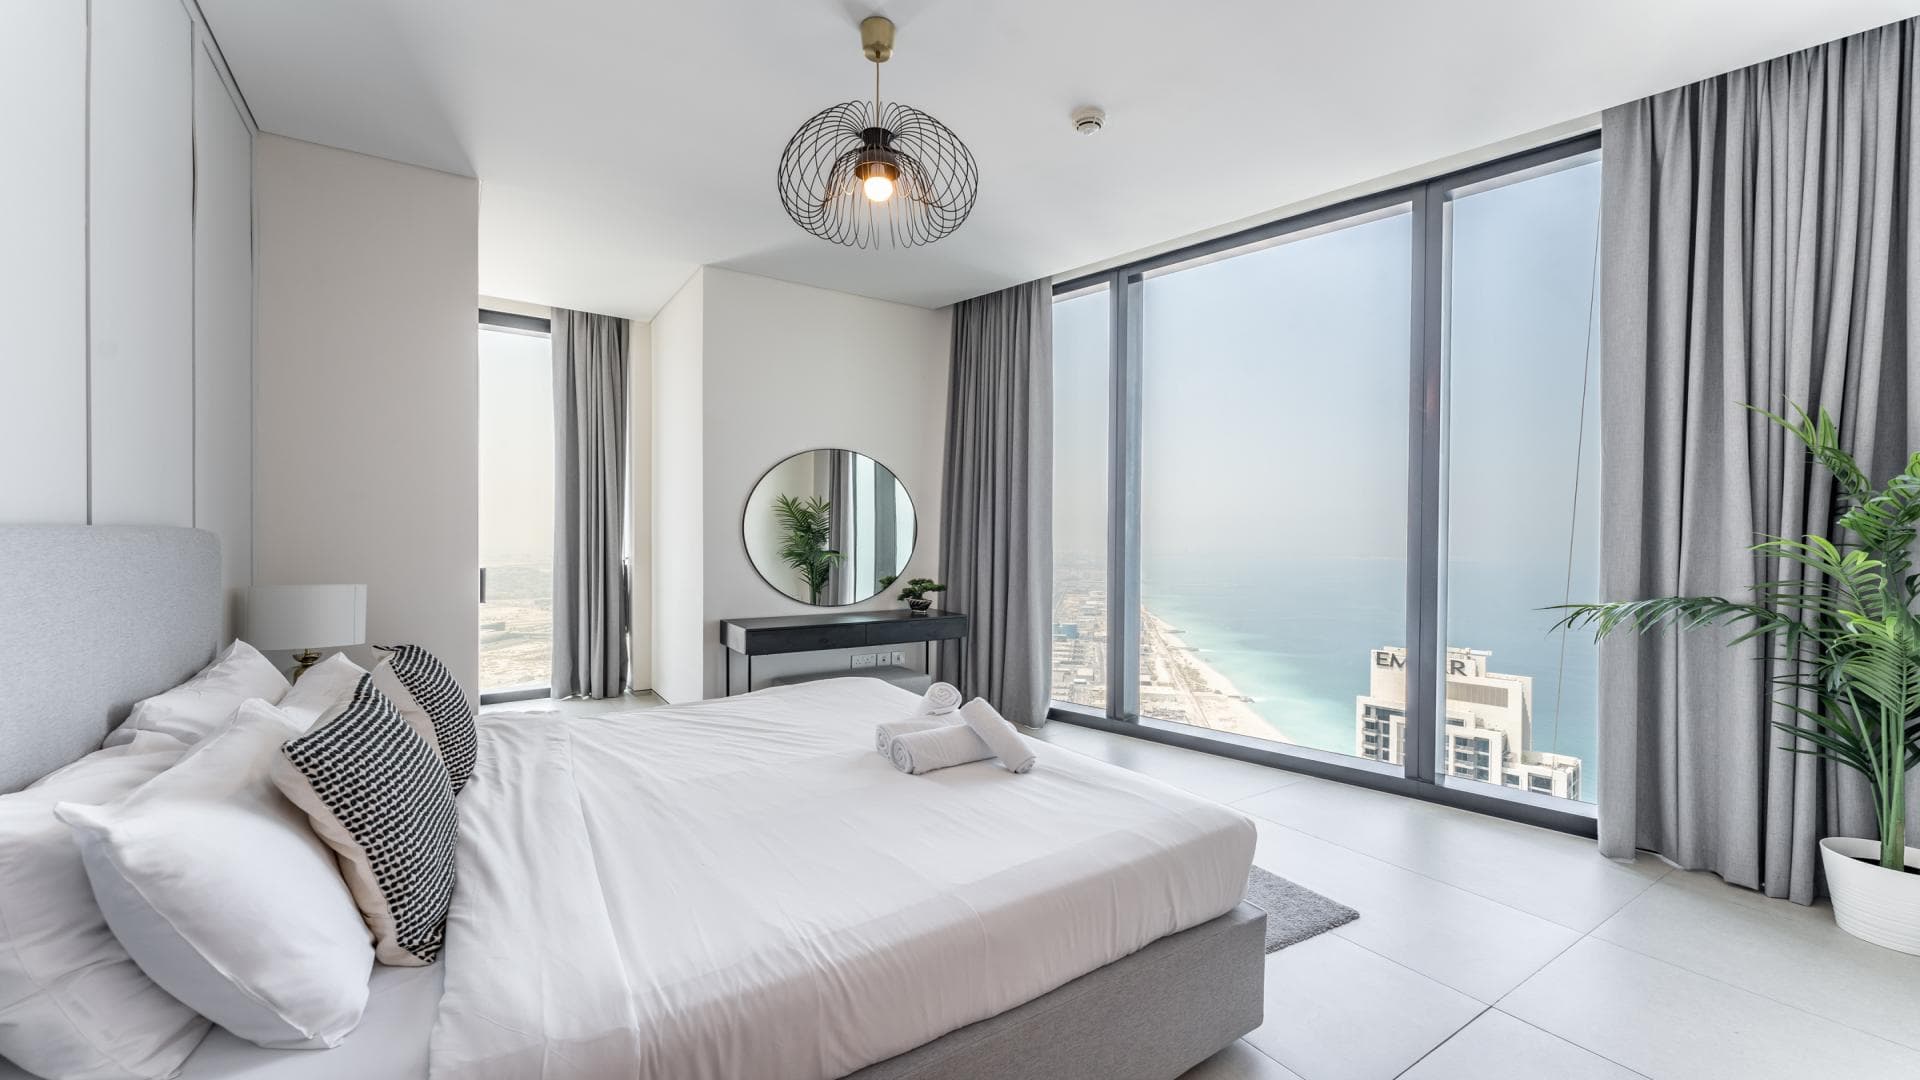 2 Bedroom Apartment For Sale The Address Jumeirah Resort And Spa Lp36313 15e269f8d2ee1500.jpg